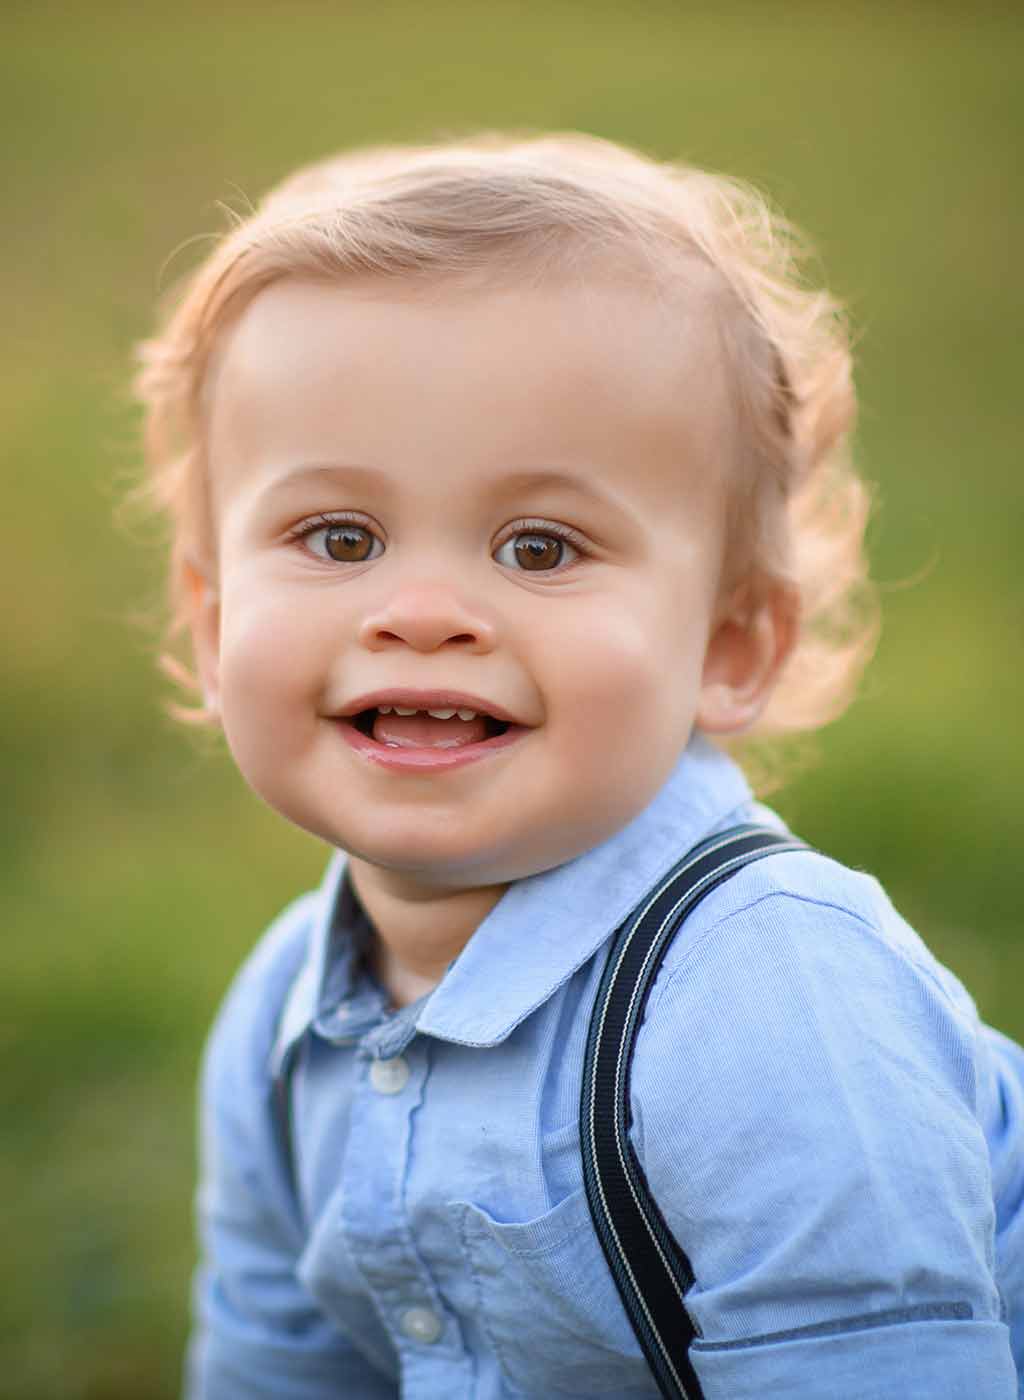 Closeup of a toddler boy smiling in a grass field